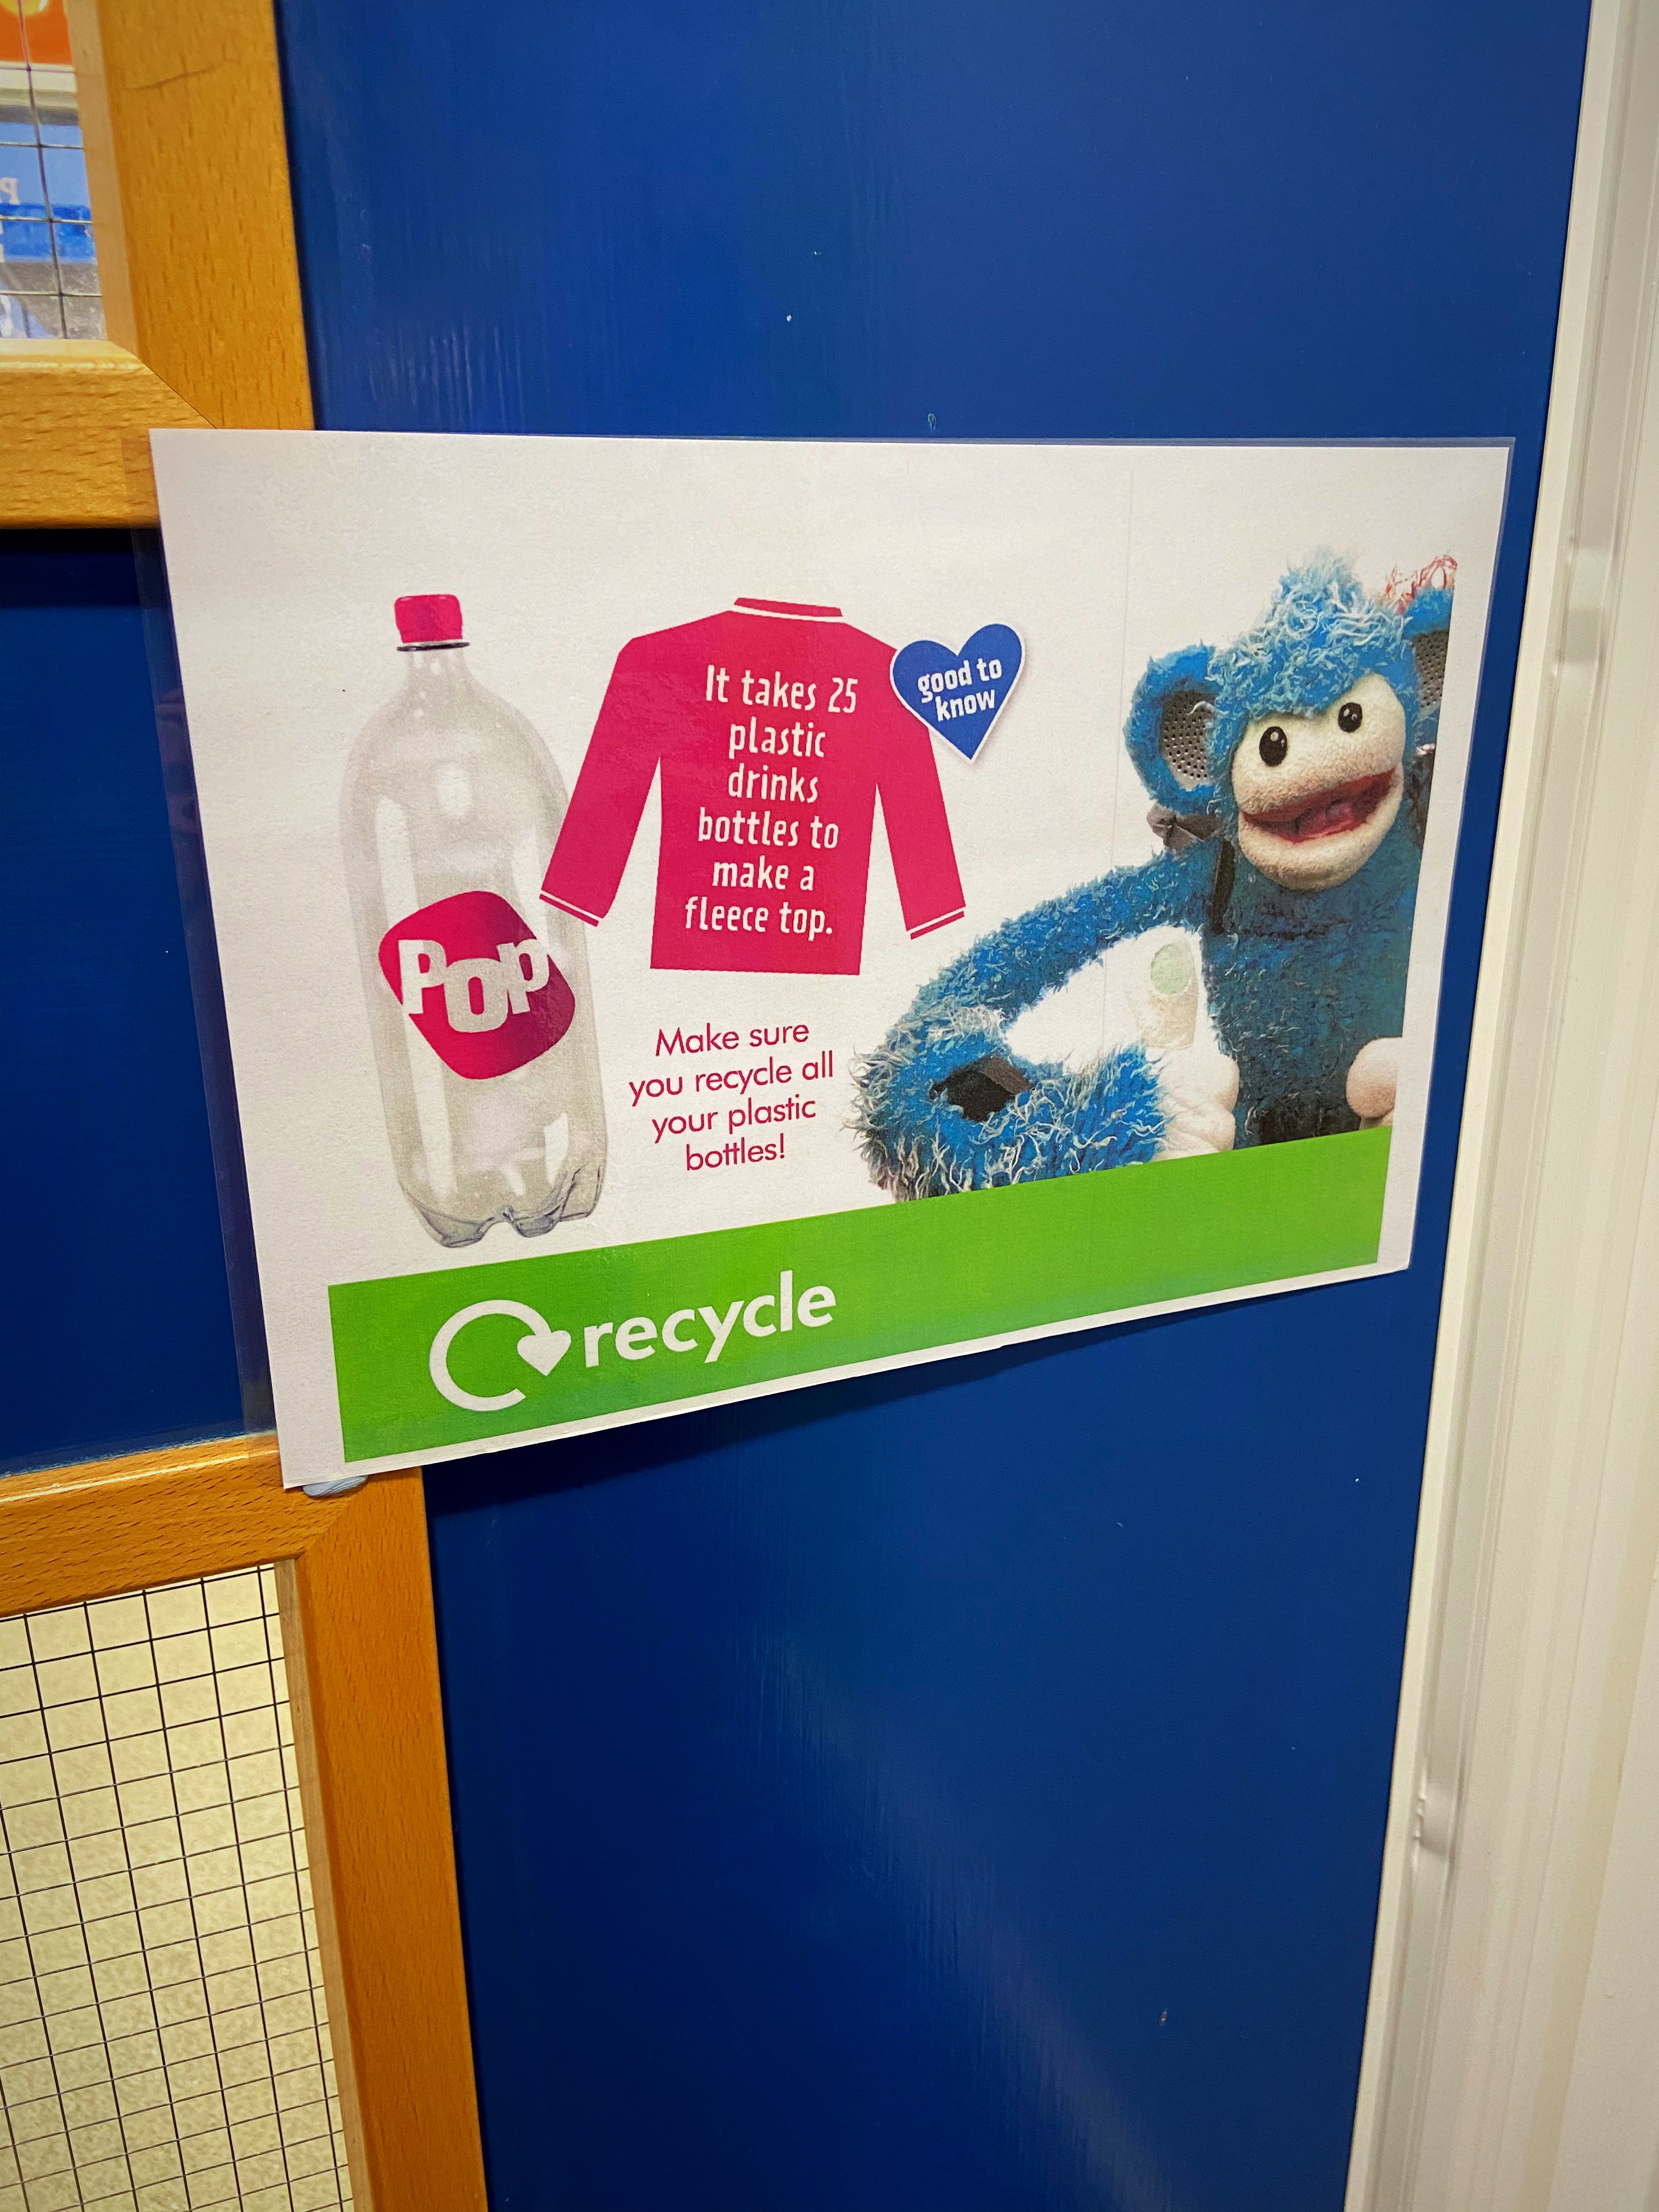 Recycling fact posters and strategies to save energy are displayed around the school